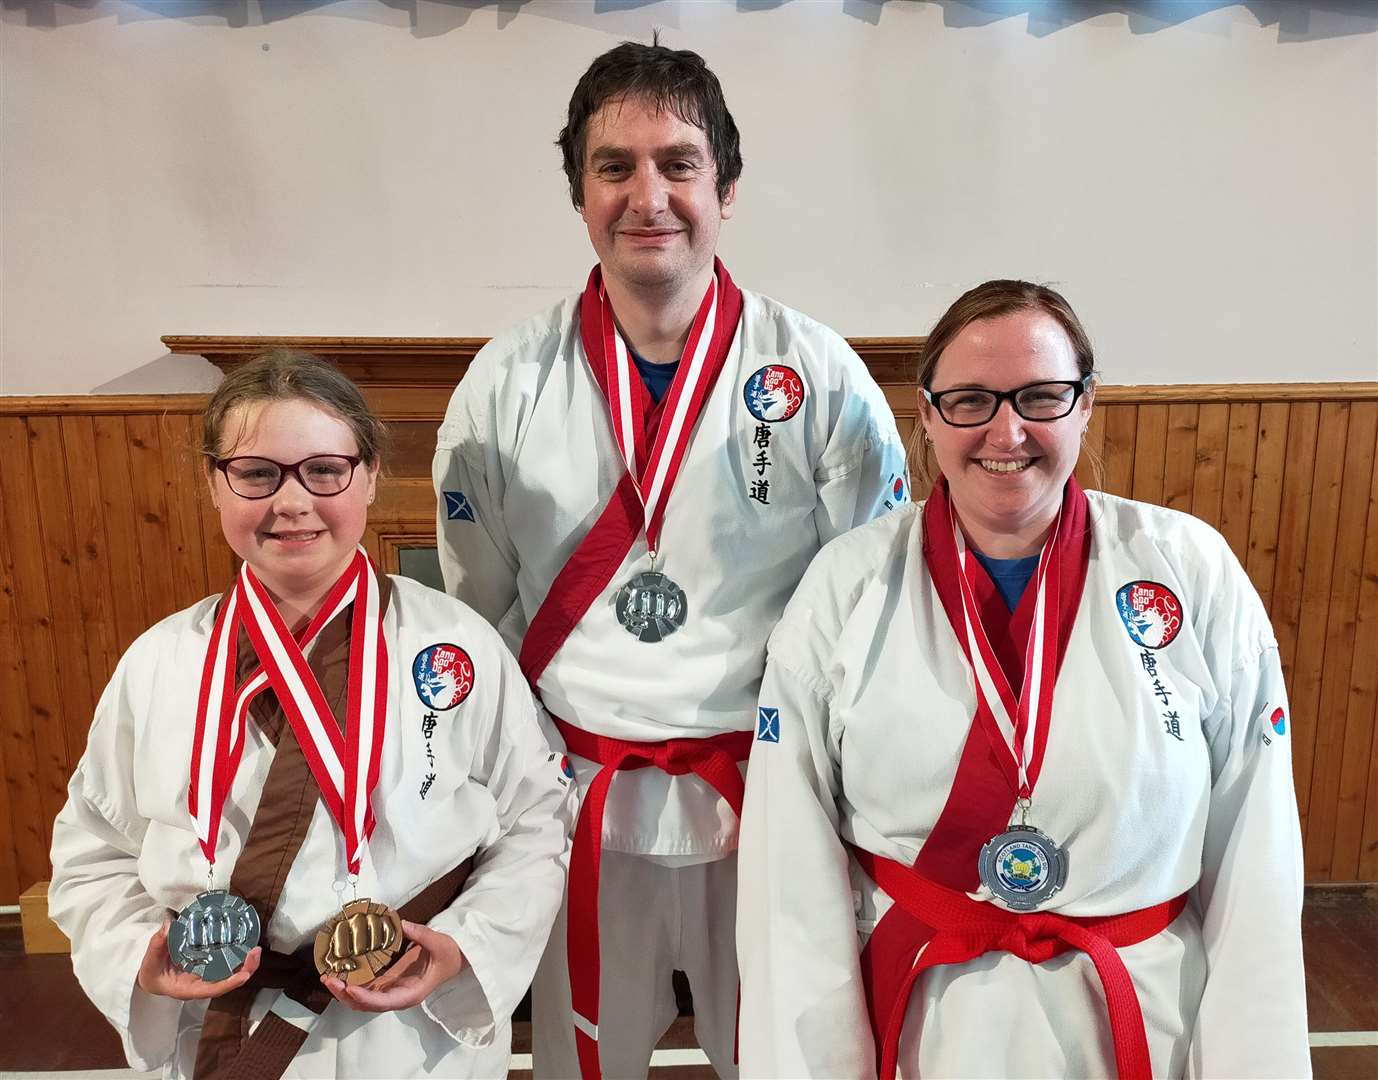 Robyn, Eoghan and Kerry with the medals they won at the recent open tournament in Elgin.